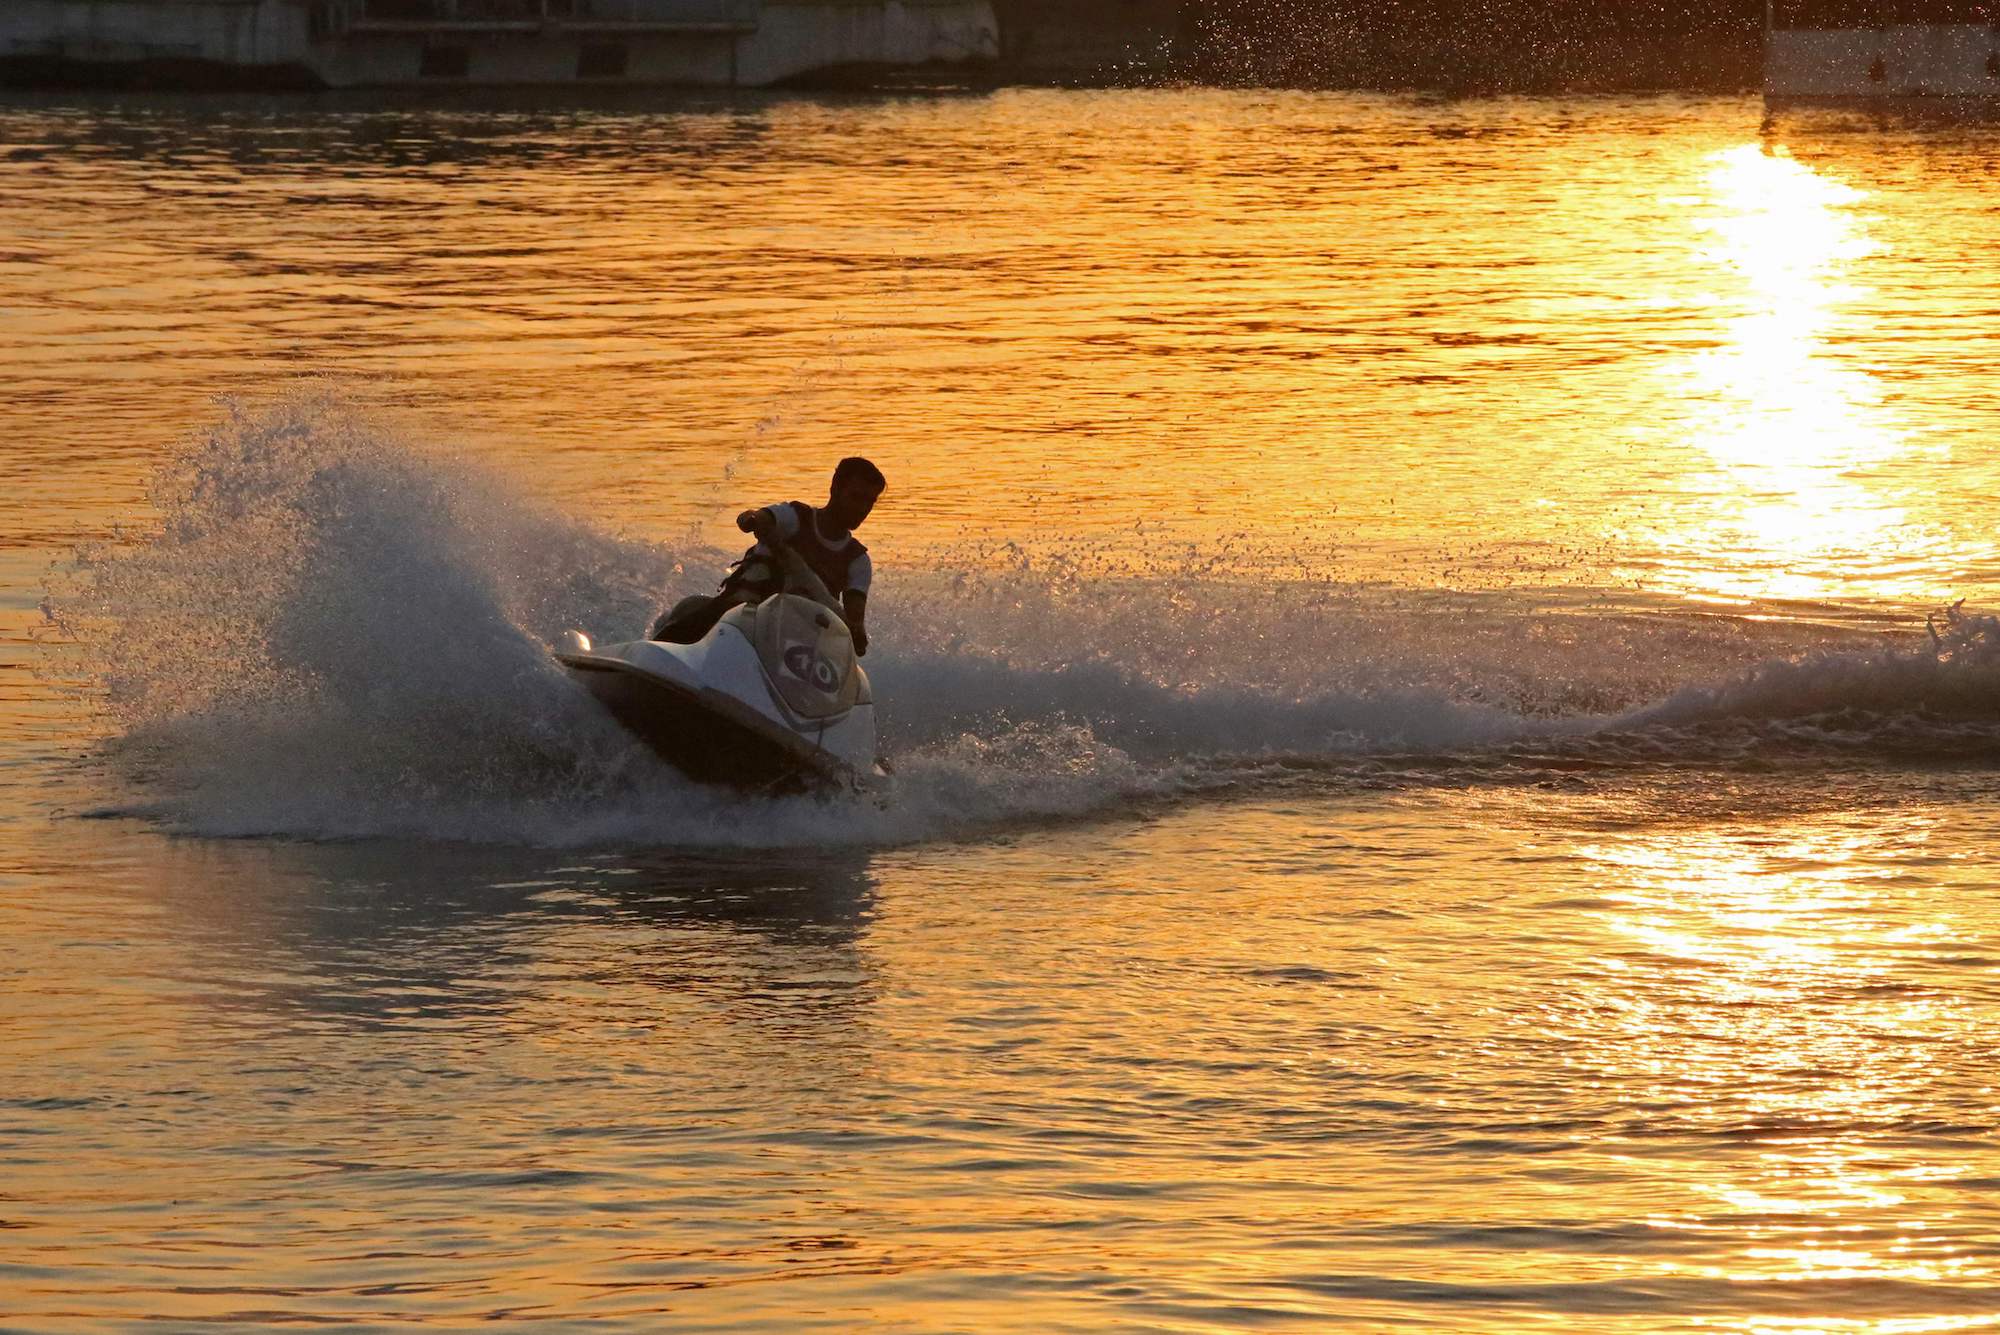 A person rides a jet ski on a river at sunset